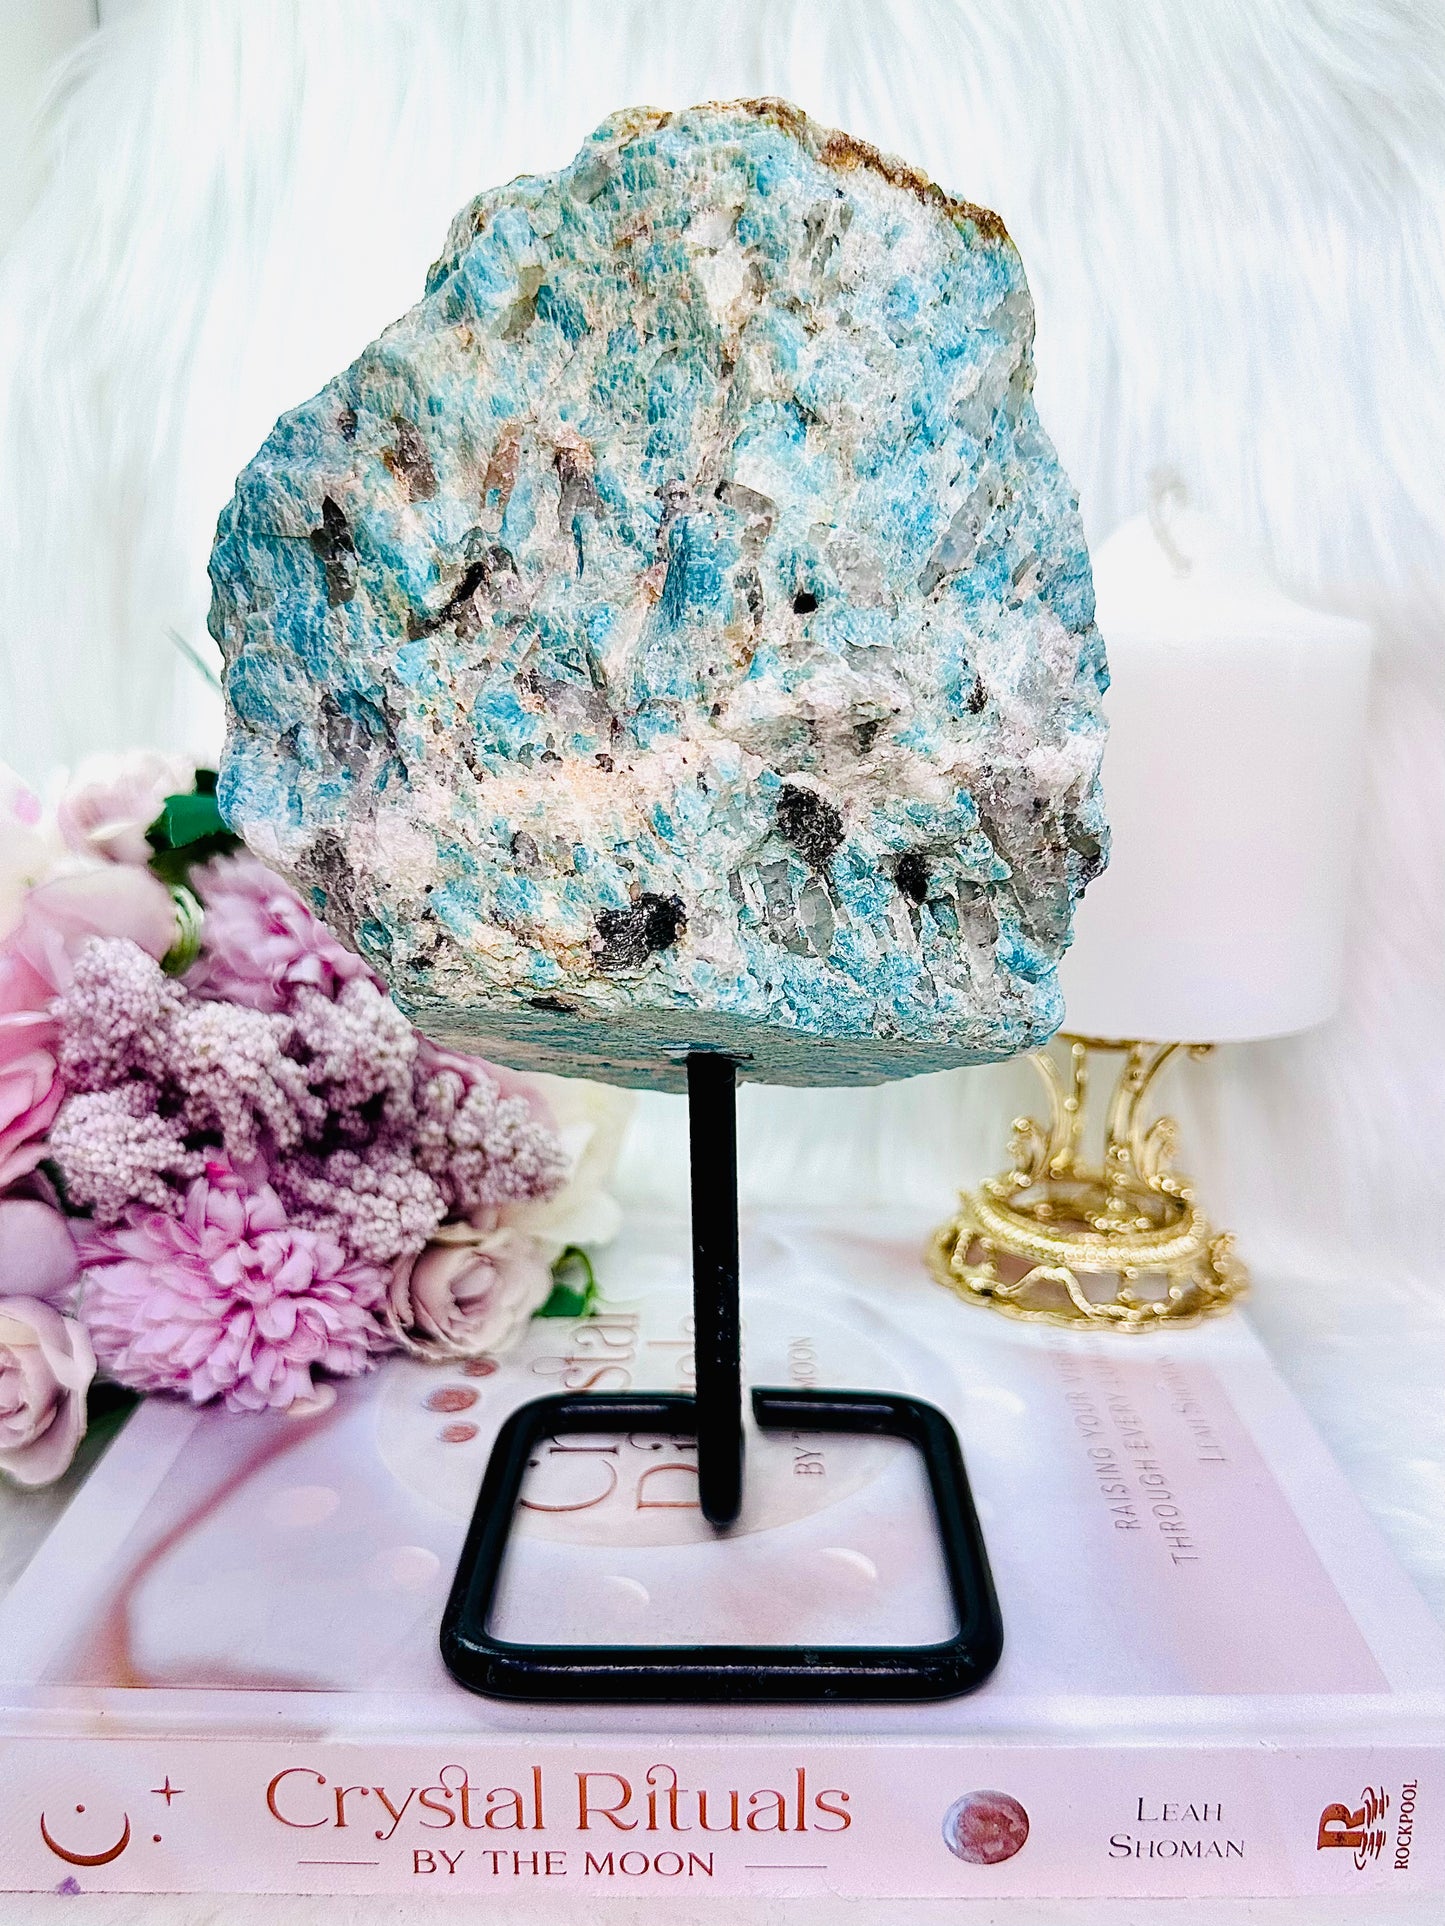 Huge Amazing Raw Rough Natural Amazonite With Smokey Quartz Inclusions 1.56KG 20cm On Stand From Brazil